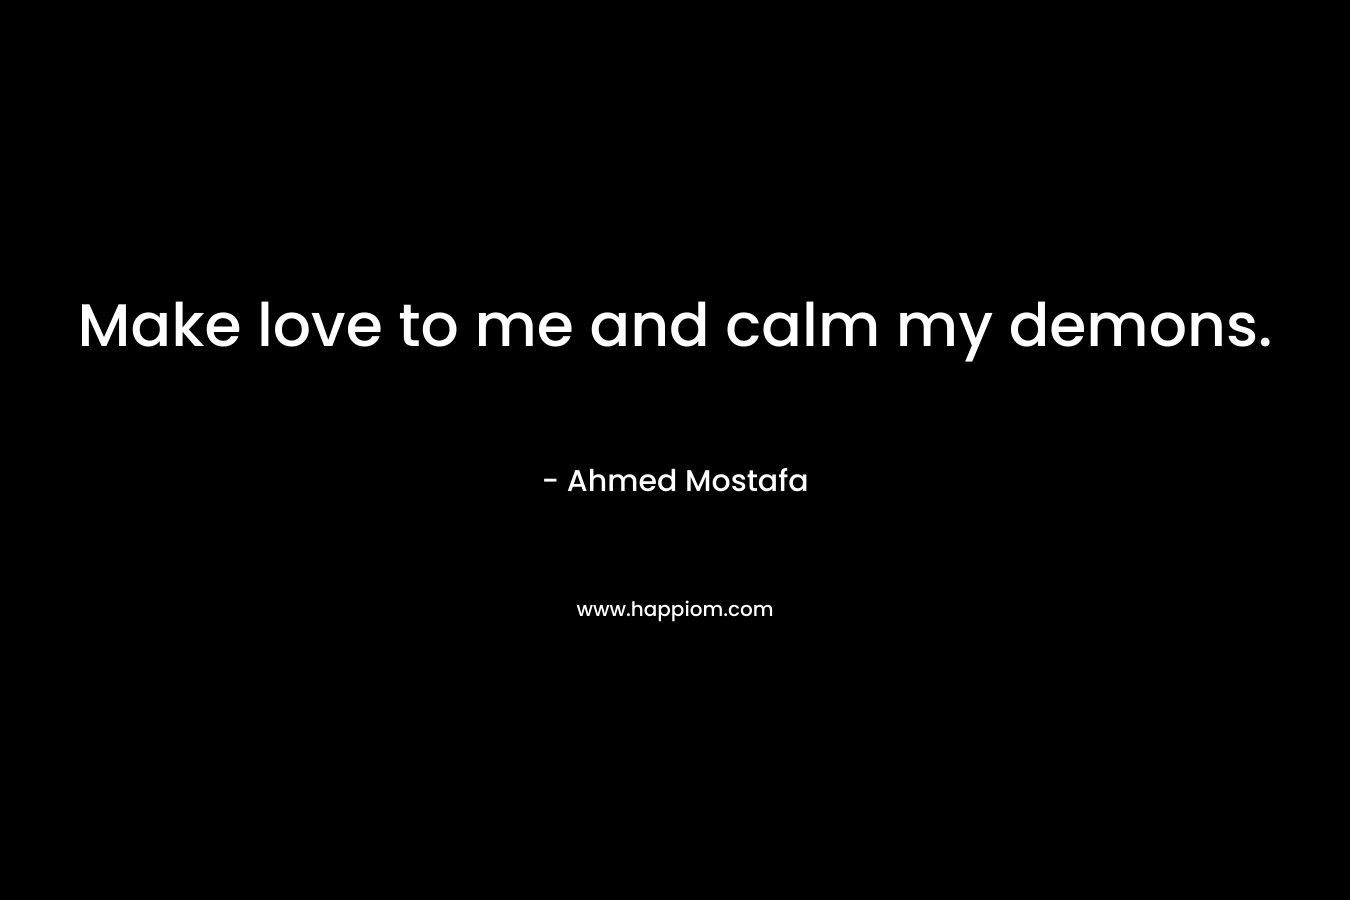 Make love to me and calm my demons.